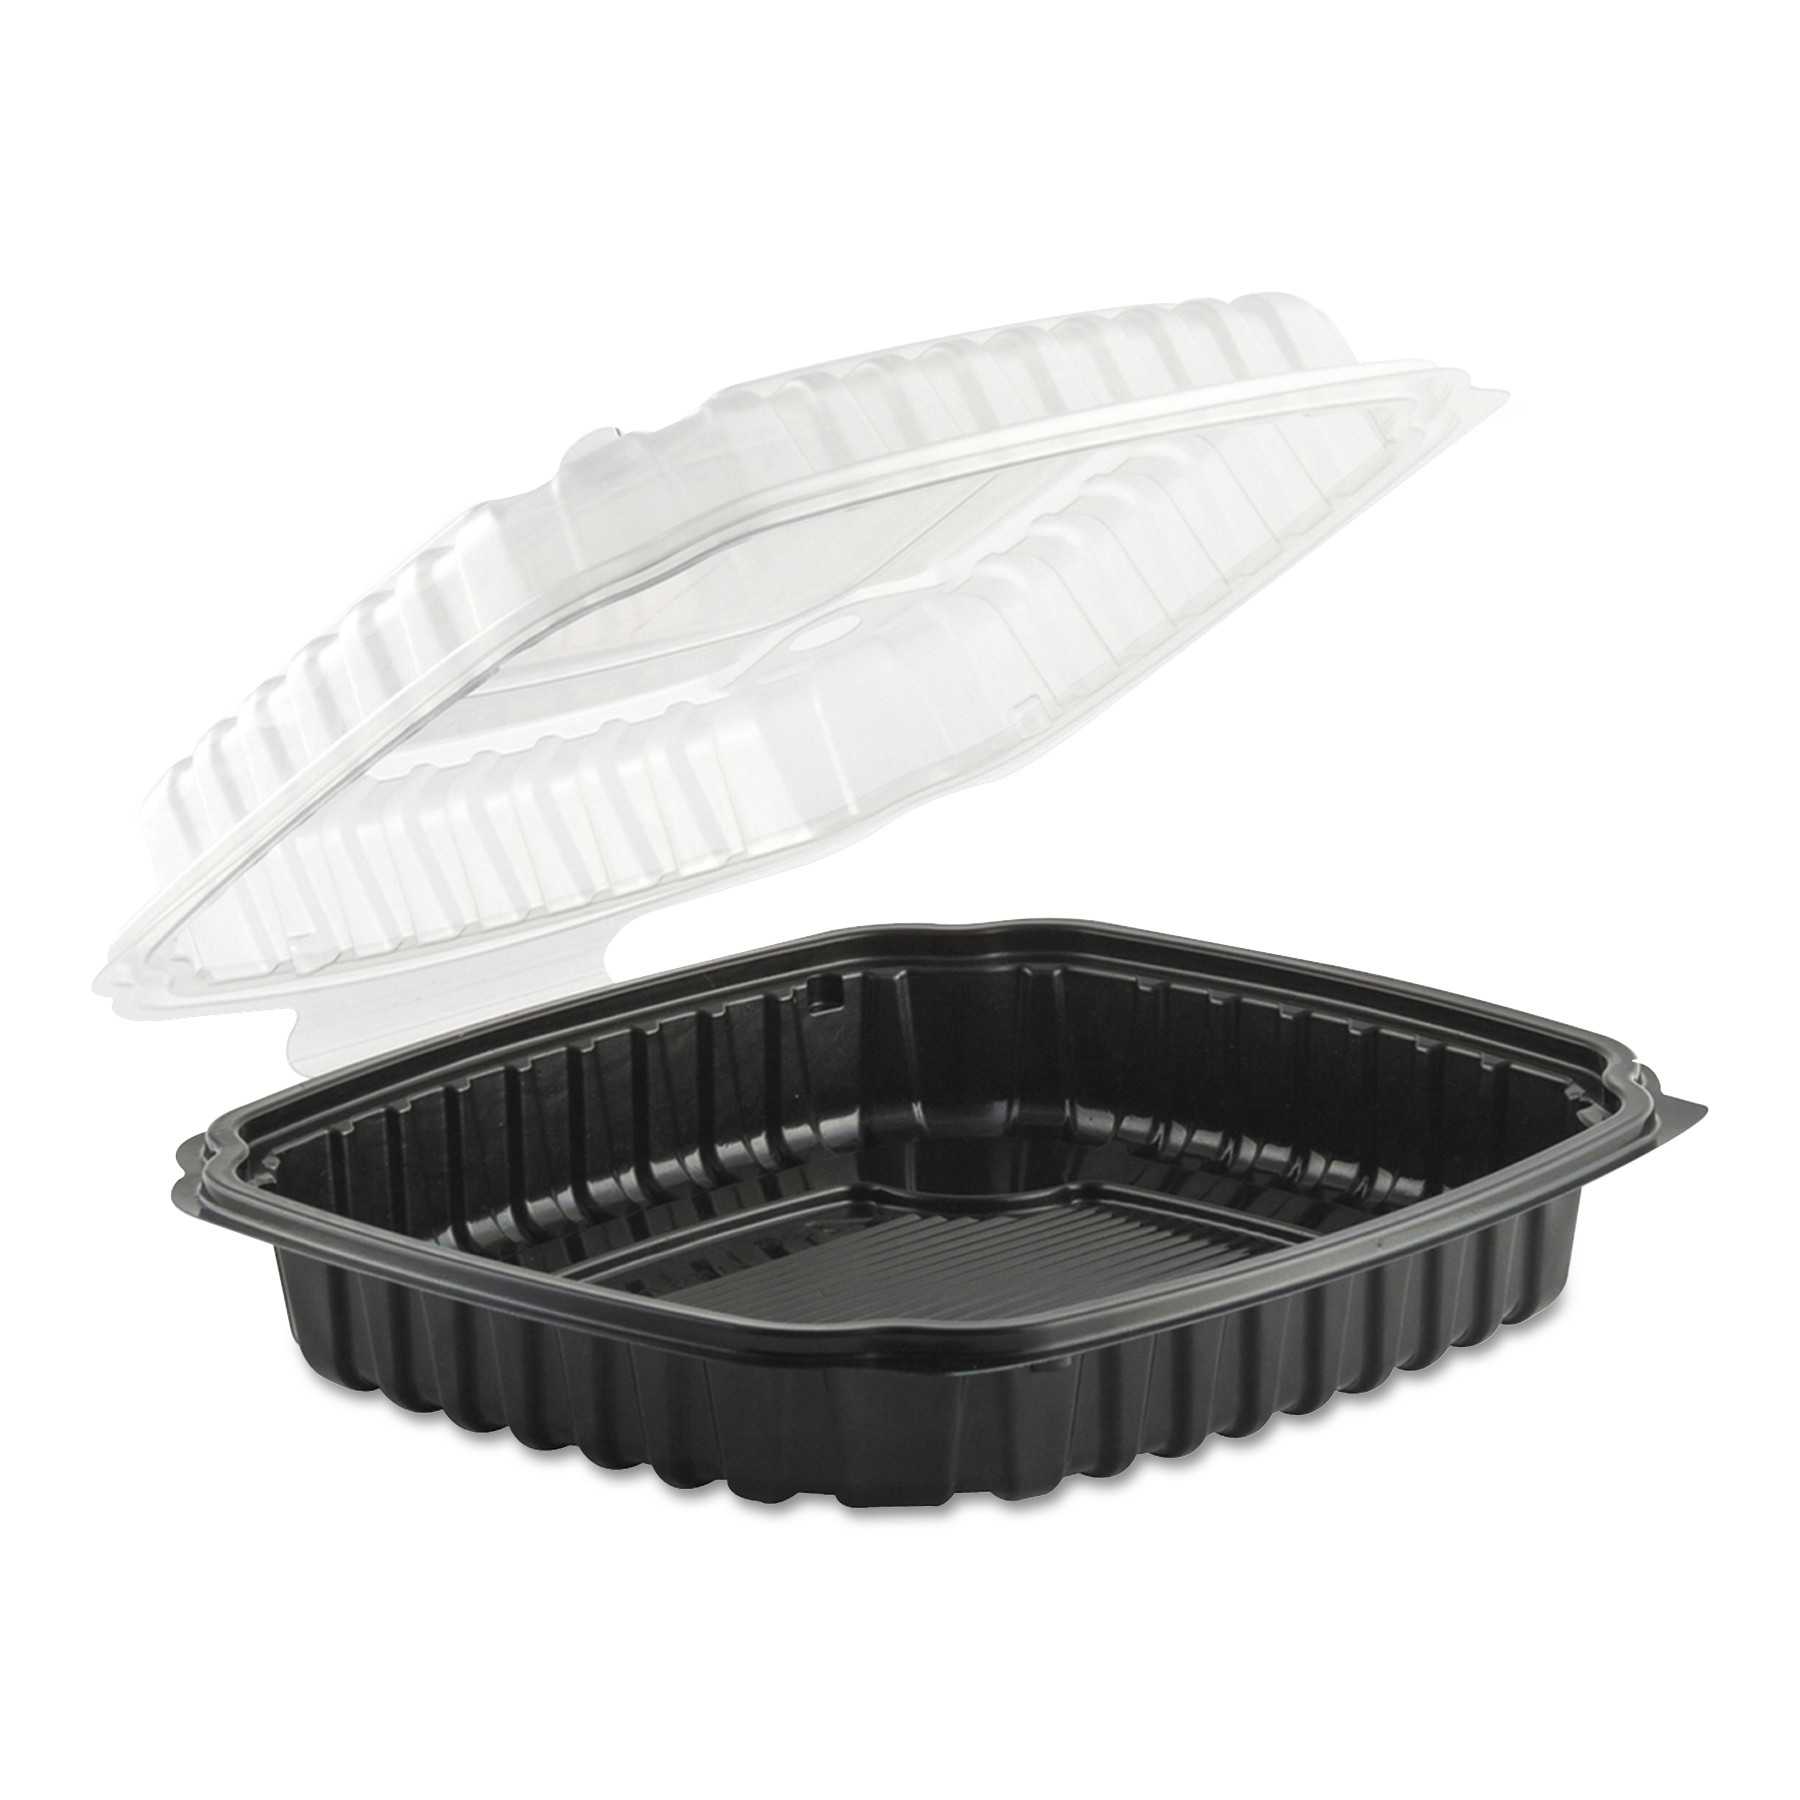  Anchor Packaging 4669911 Culinary Basics Microwavable Container, 36 oz, 9 x 9 x 2.5, Clear/Black, 100/Carton (ANZ4669911) 